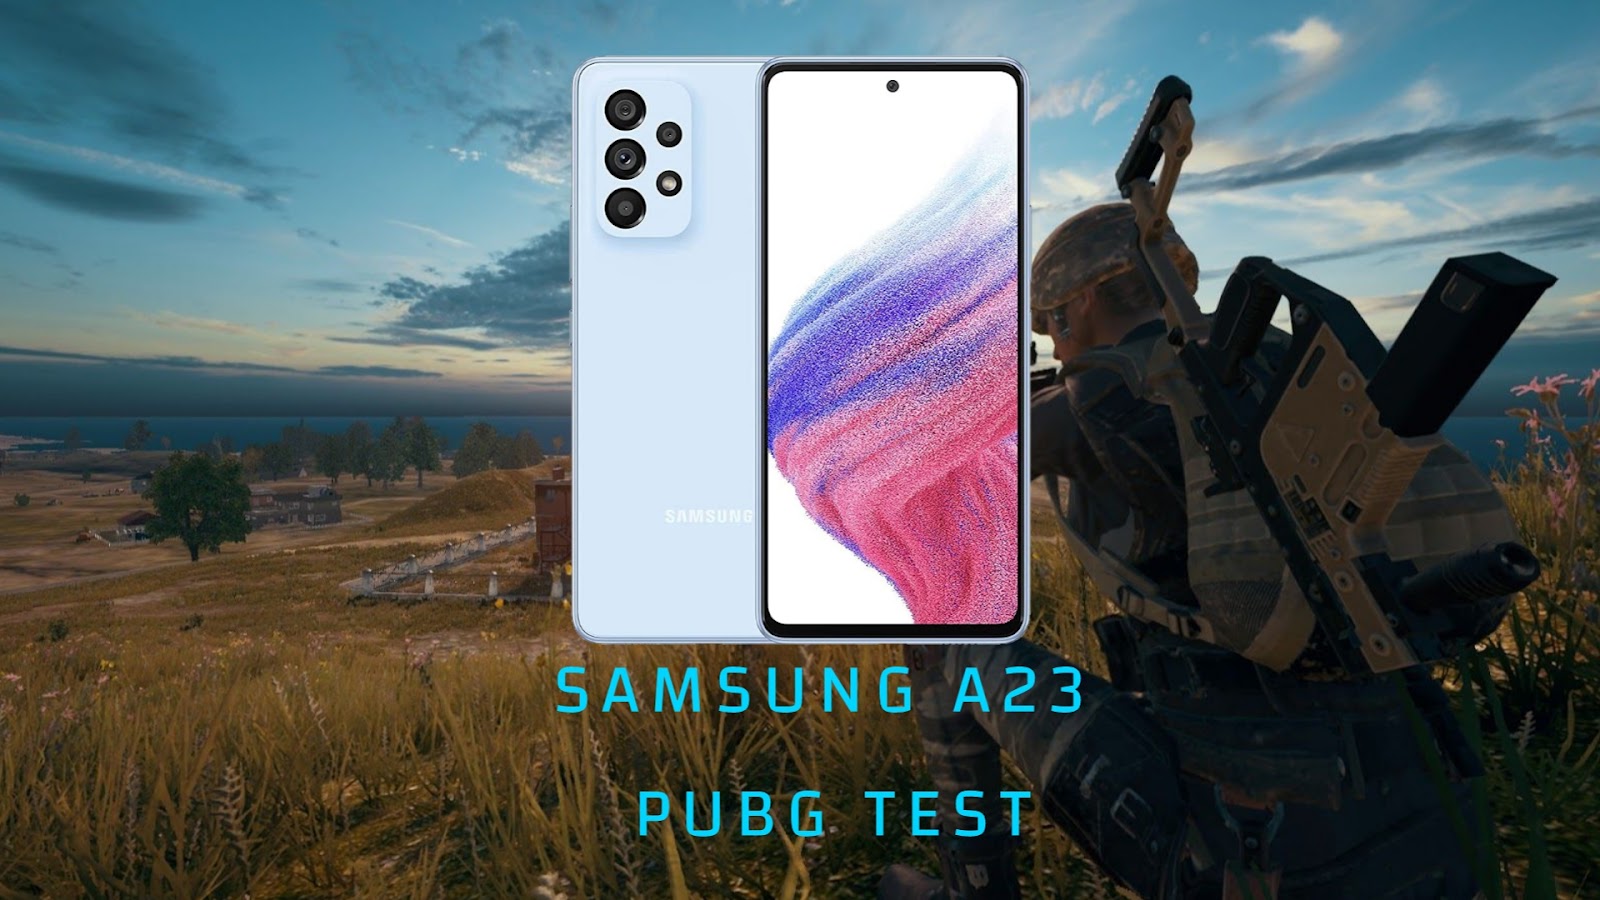 Samsung A23 BGMI/ pubg graphics setting, FPS and demonstration